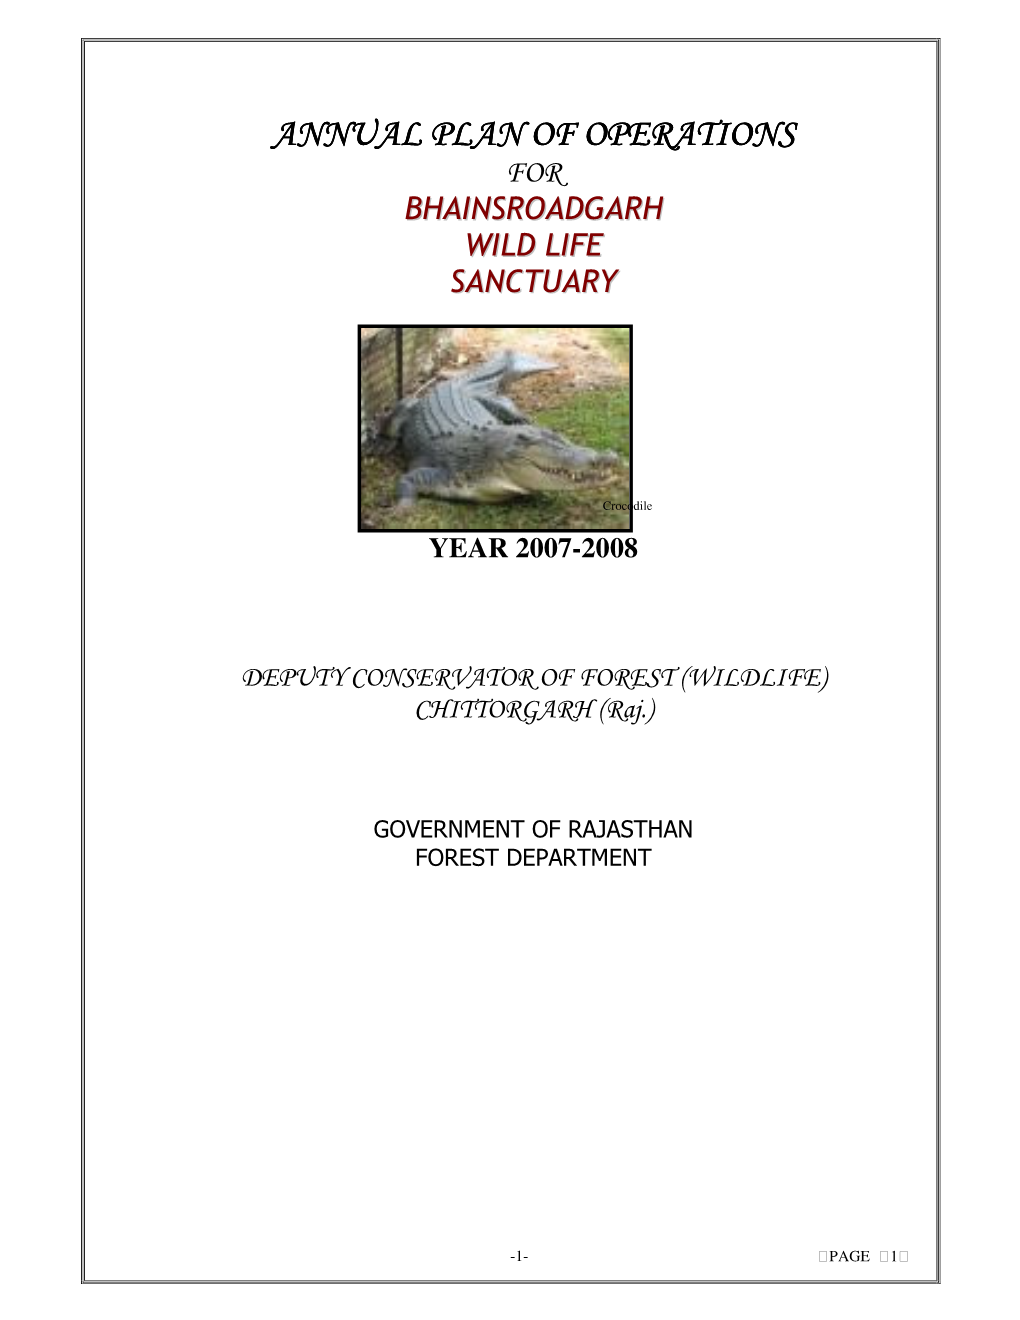 Annual Plan of Operation for Bhainsroadgarh Wildlife Sanctuary